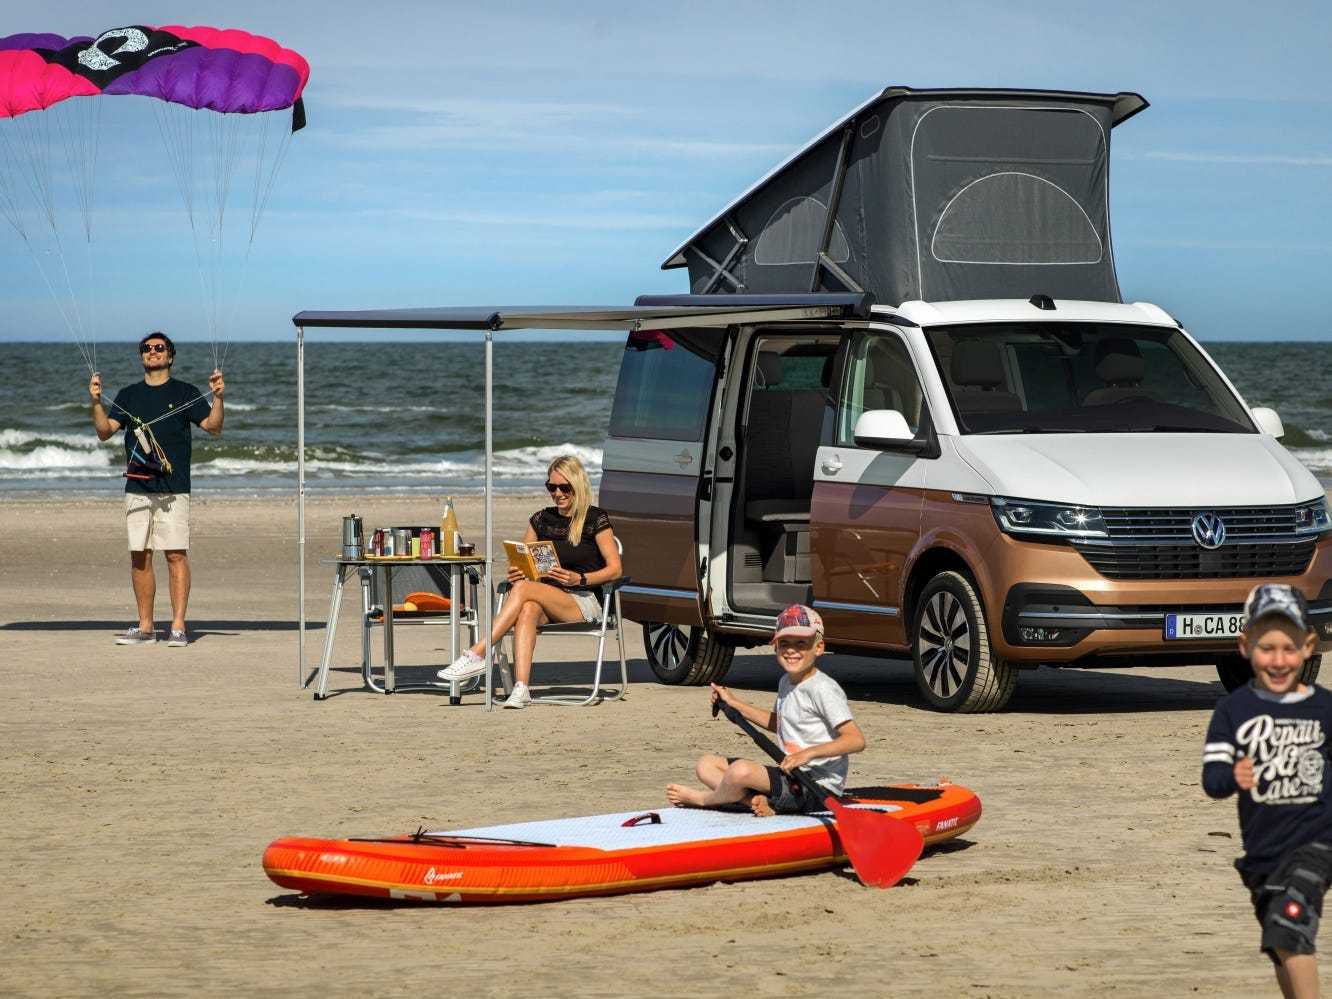 Thinking of converting a van into a camper? Here are the best vehicles for it and some advice to get started